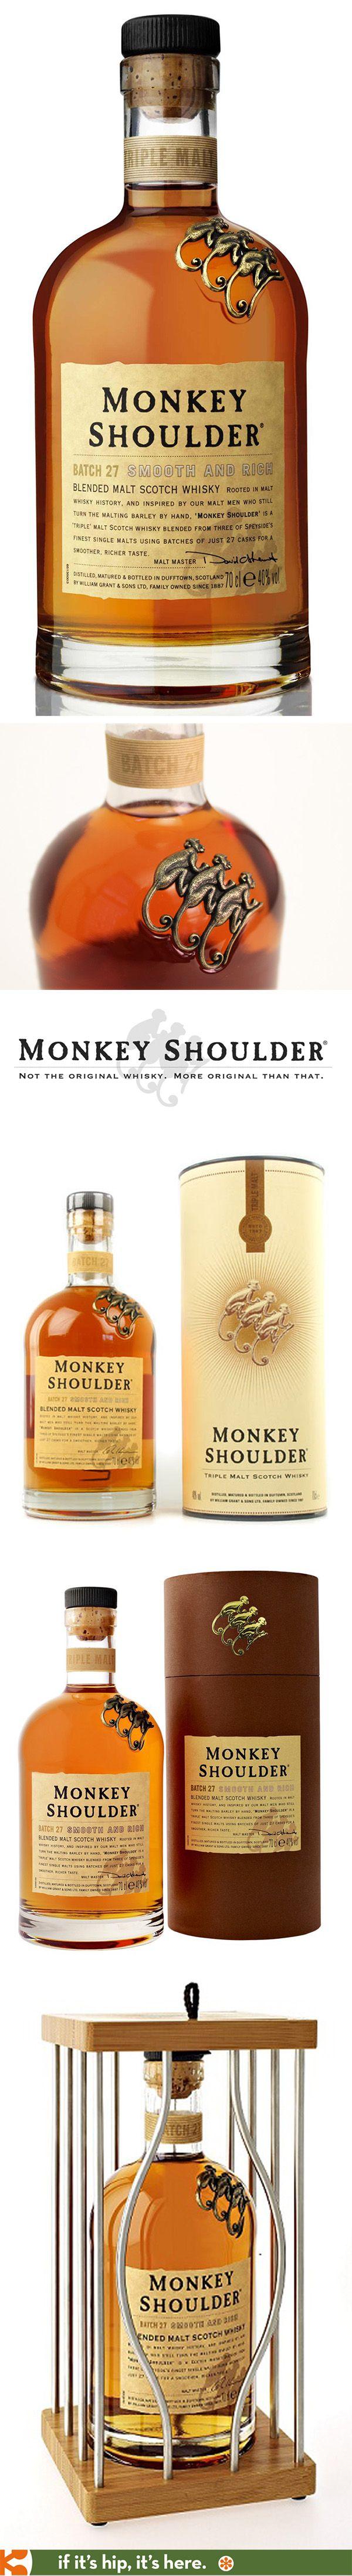 Monkey Shoulder Whiskey Logo - Monkey Shoulder Whisky and its various packaging. Packaging Pick